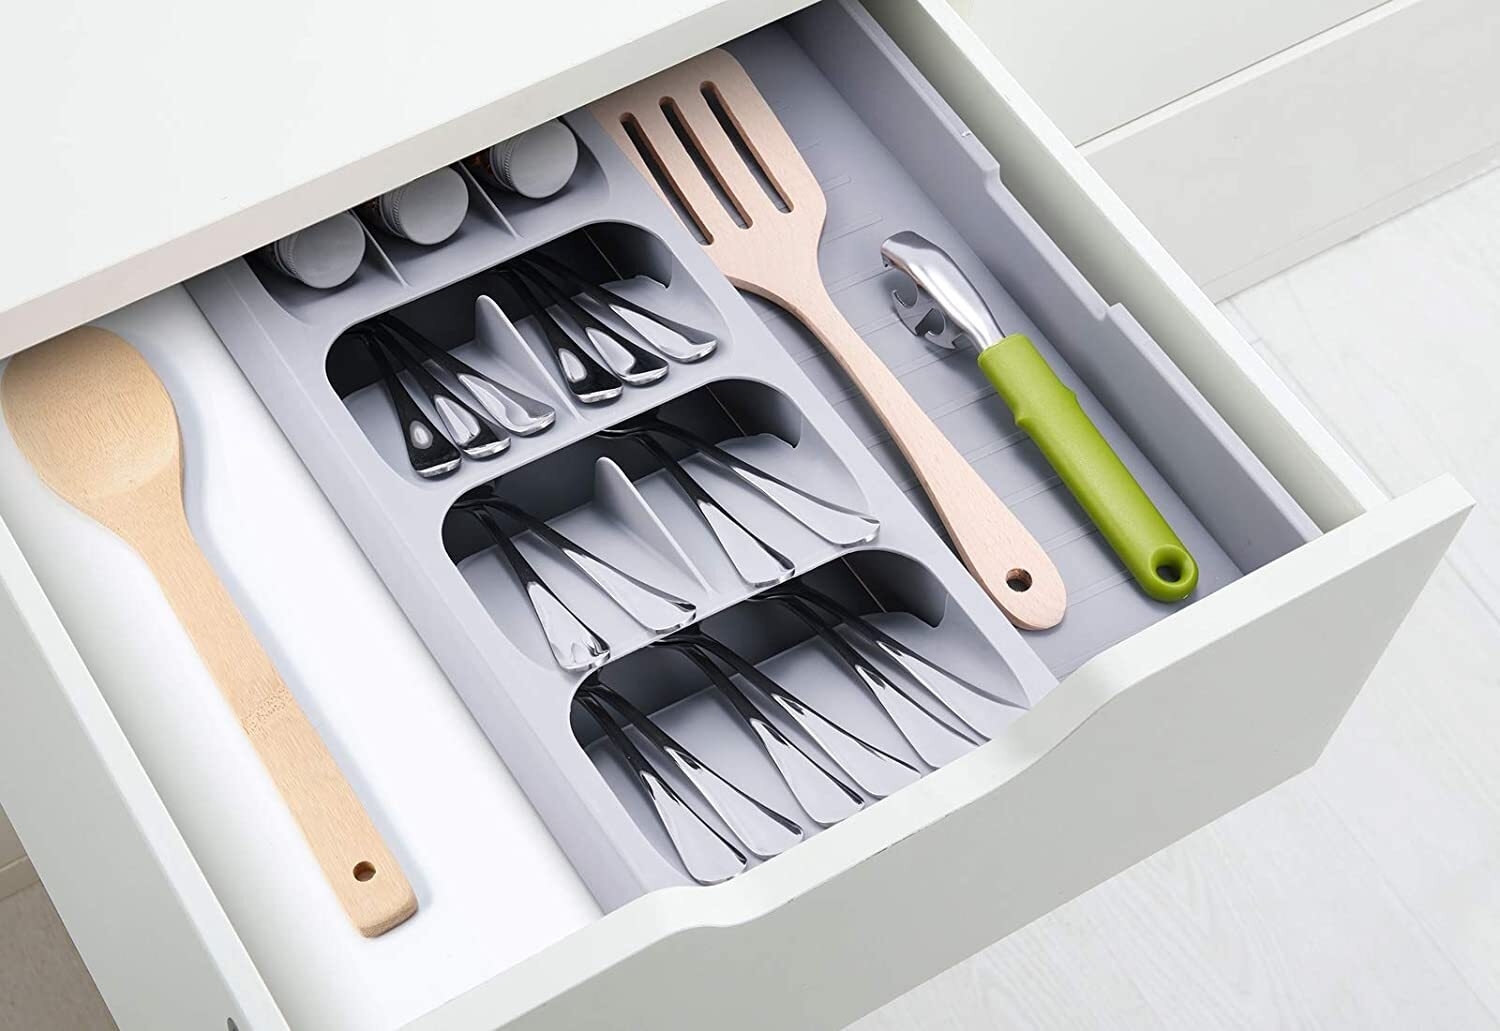 The drawer organizer in a drawer holding both eating utensils, and cooking utensils